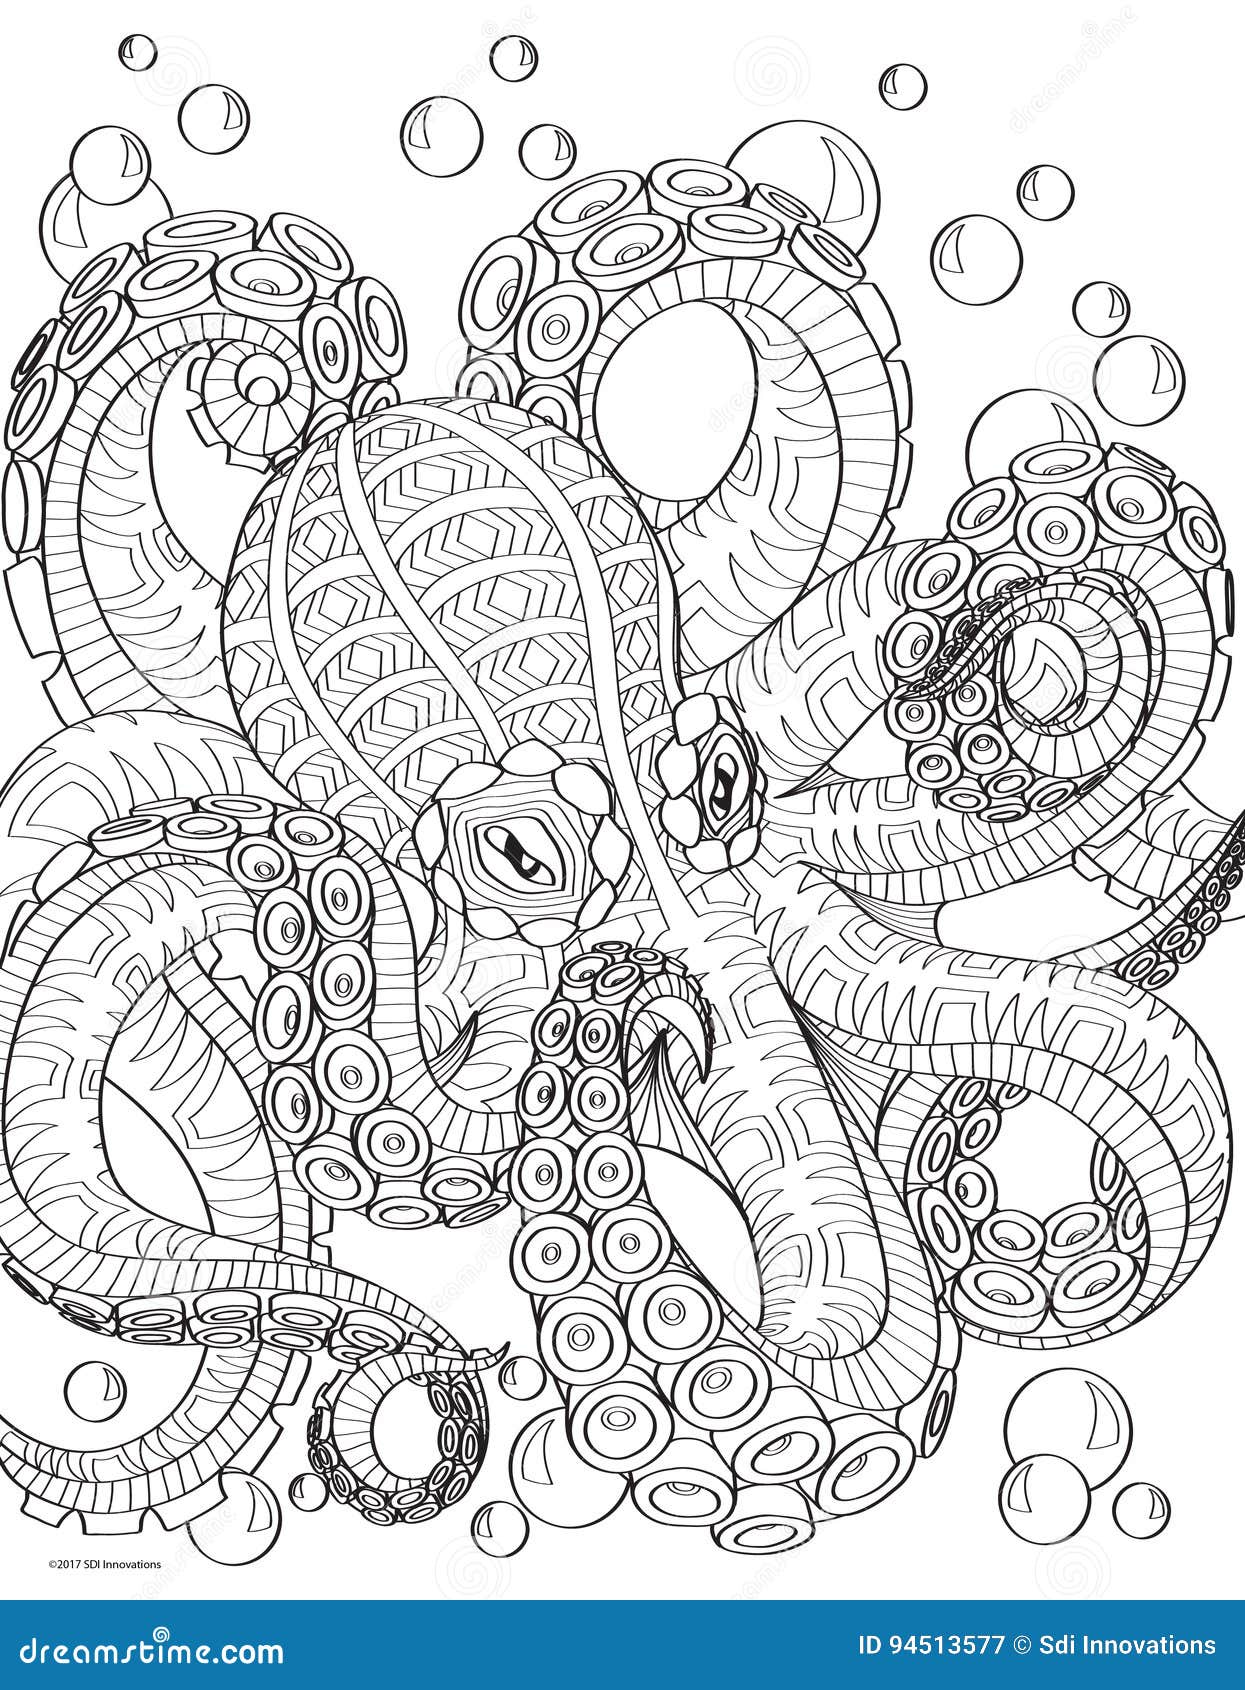 Octopus Coloring Book Page stock illustration. Illustration of ...